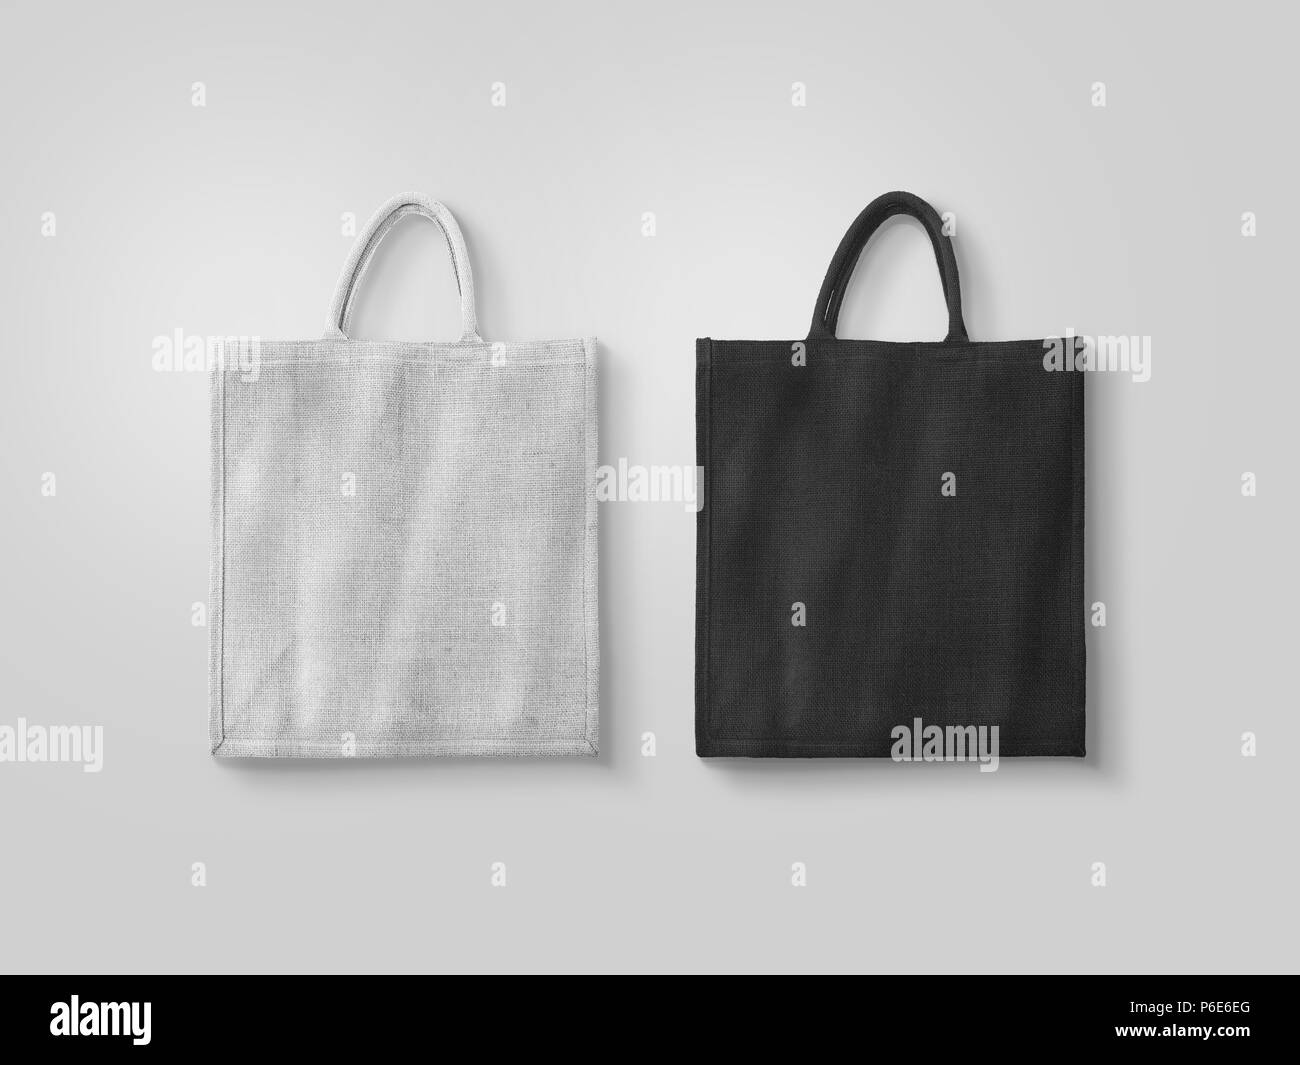 Wholesale Recycle Bags Manufacturer - Reusable Bags Supplier